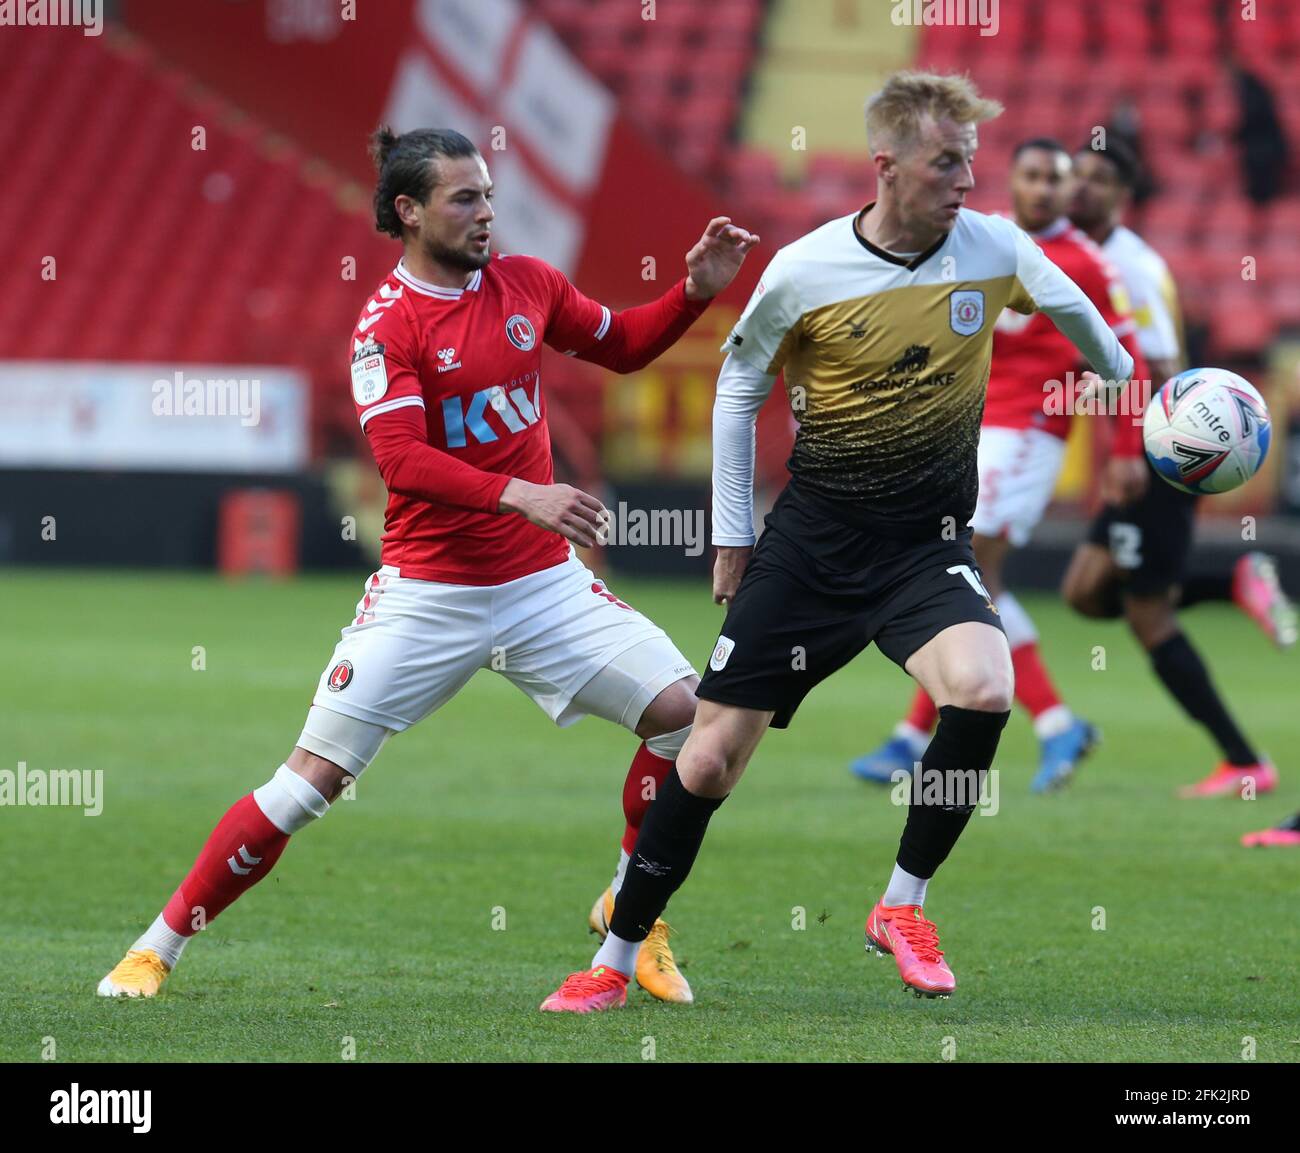 Woolwich, UK. 27th Apr, 2021. WOOLWICH, United Kingdom, APRIL 27: Charlie Kirk of Crewe Alexander holds of Charlton Athletic's Jake Forster-Caskey during Sky Bet League One between Charlton Athletic and Crewe Alexandra at The Valley, Woolwich on 27th April 2021 Credit: Action Foto Sport/Alamy Live News Stock Photo